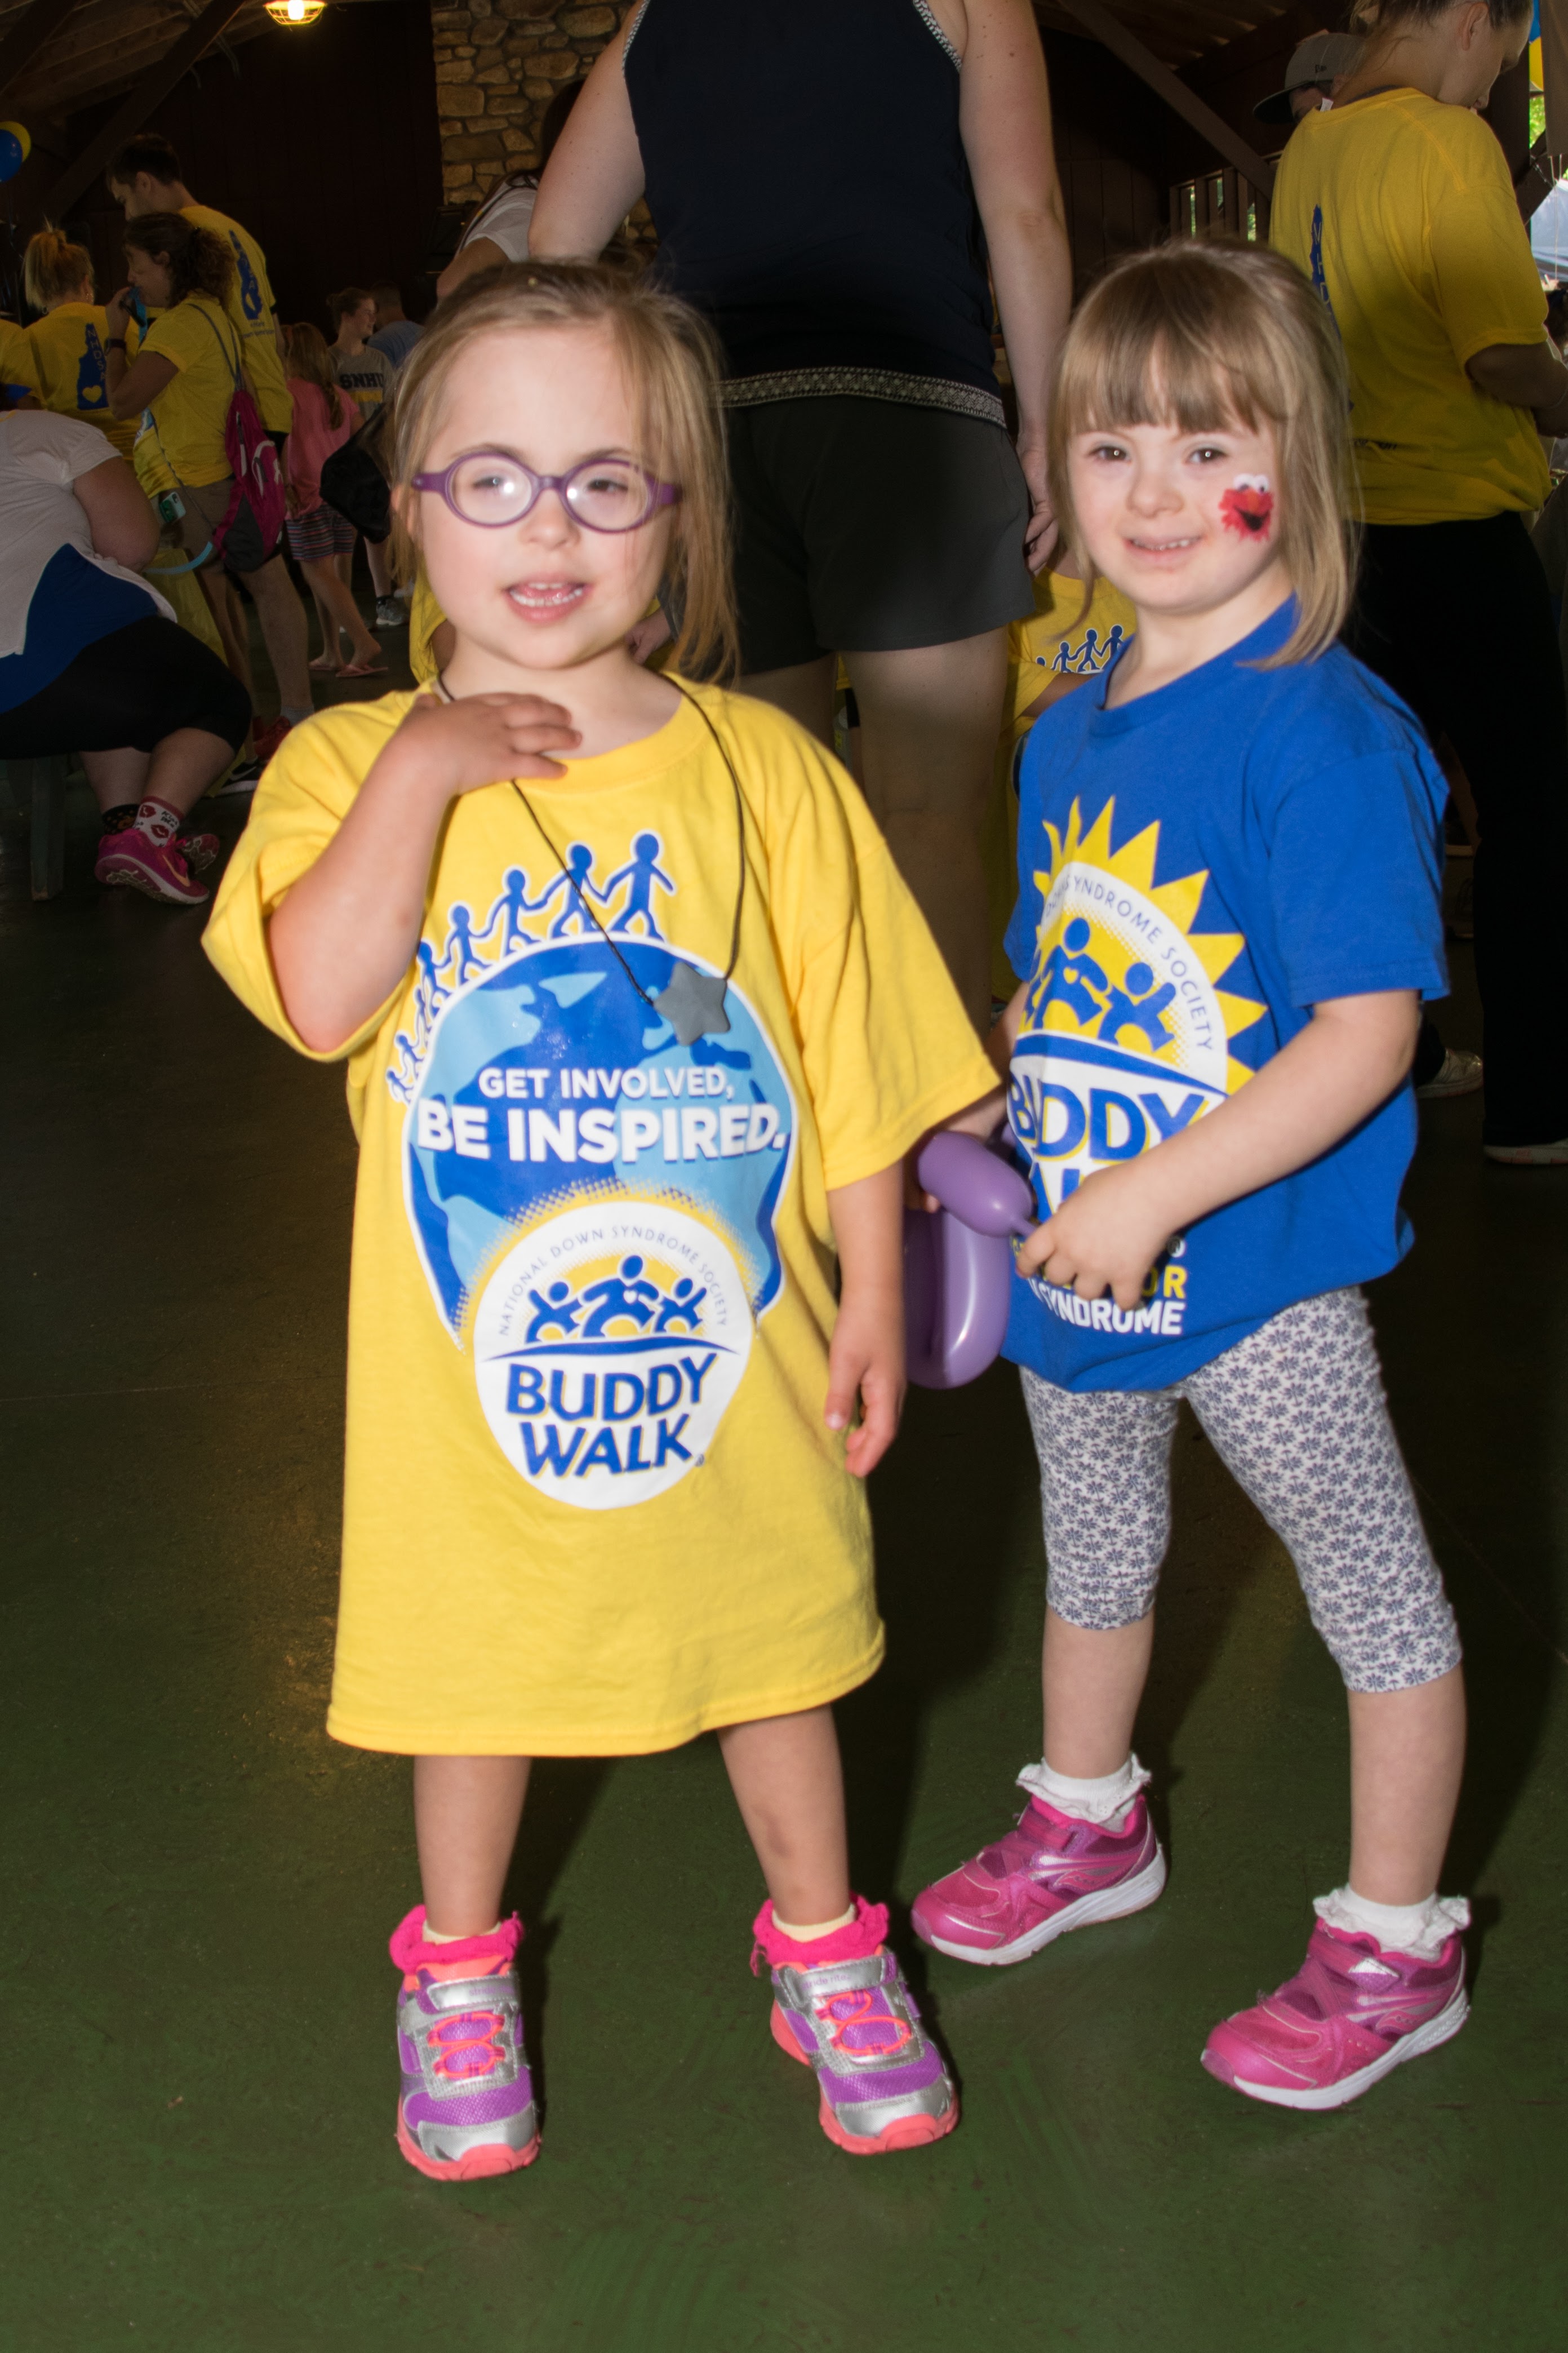 two small girls with down syndrome smiling at a buddy walk wearing their buddy walk t-shirts